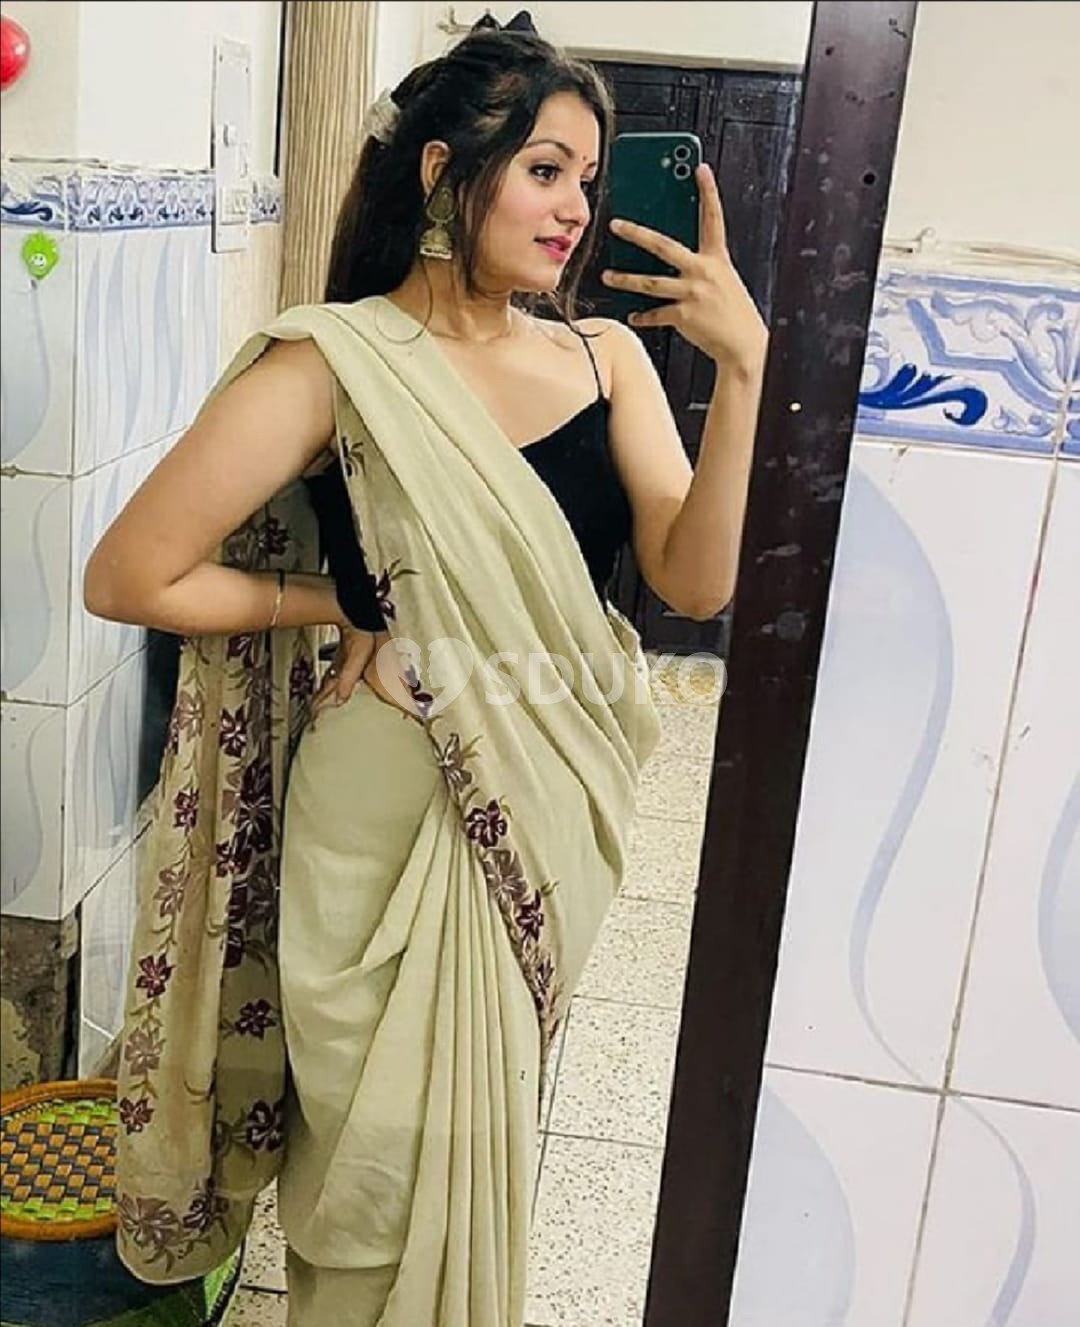 GENUINE PROFILE AVAILABLE IN CHENNAI ✅100% SAFE AND SECURE TODAY LOW PRICE UNLIMITED ENJOY HOT COLLEGE GIRL HOUSEWIFE 